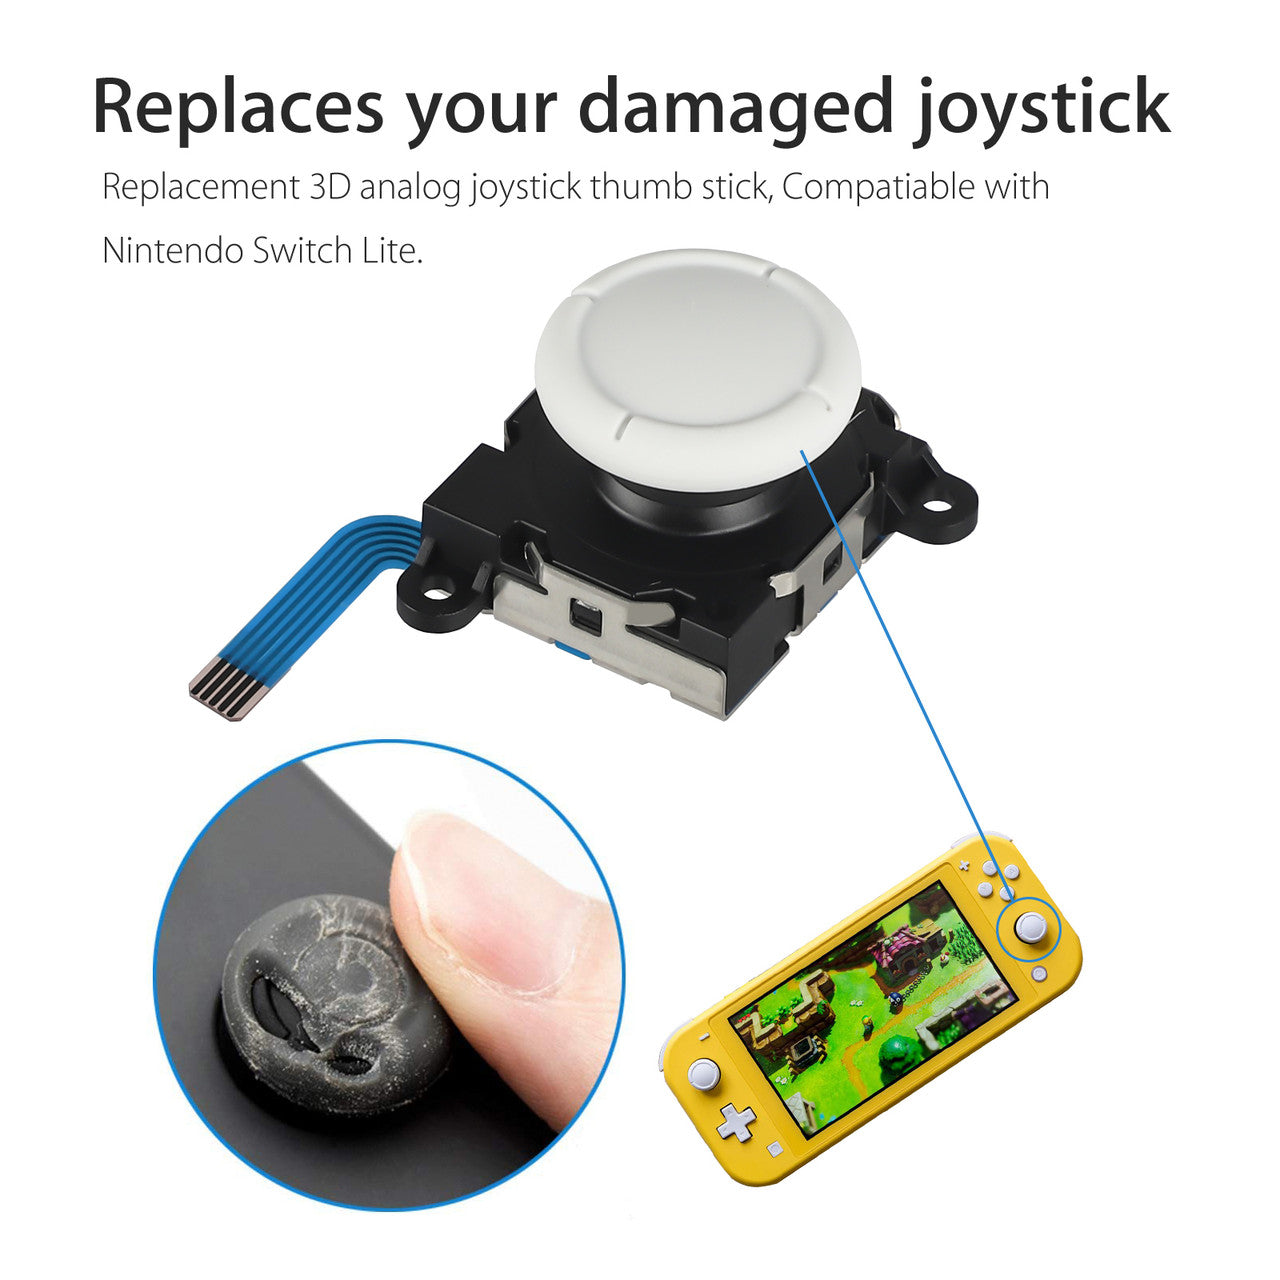 Joystick Switch Controller Replacement, Joystick Repair Tool Parts Compatible With Nintendo Switch Joycon Controller, Joystick Analog Thumb Stick, Include Screwdrivers, Thumbstick Caps